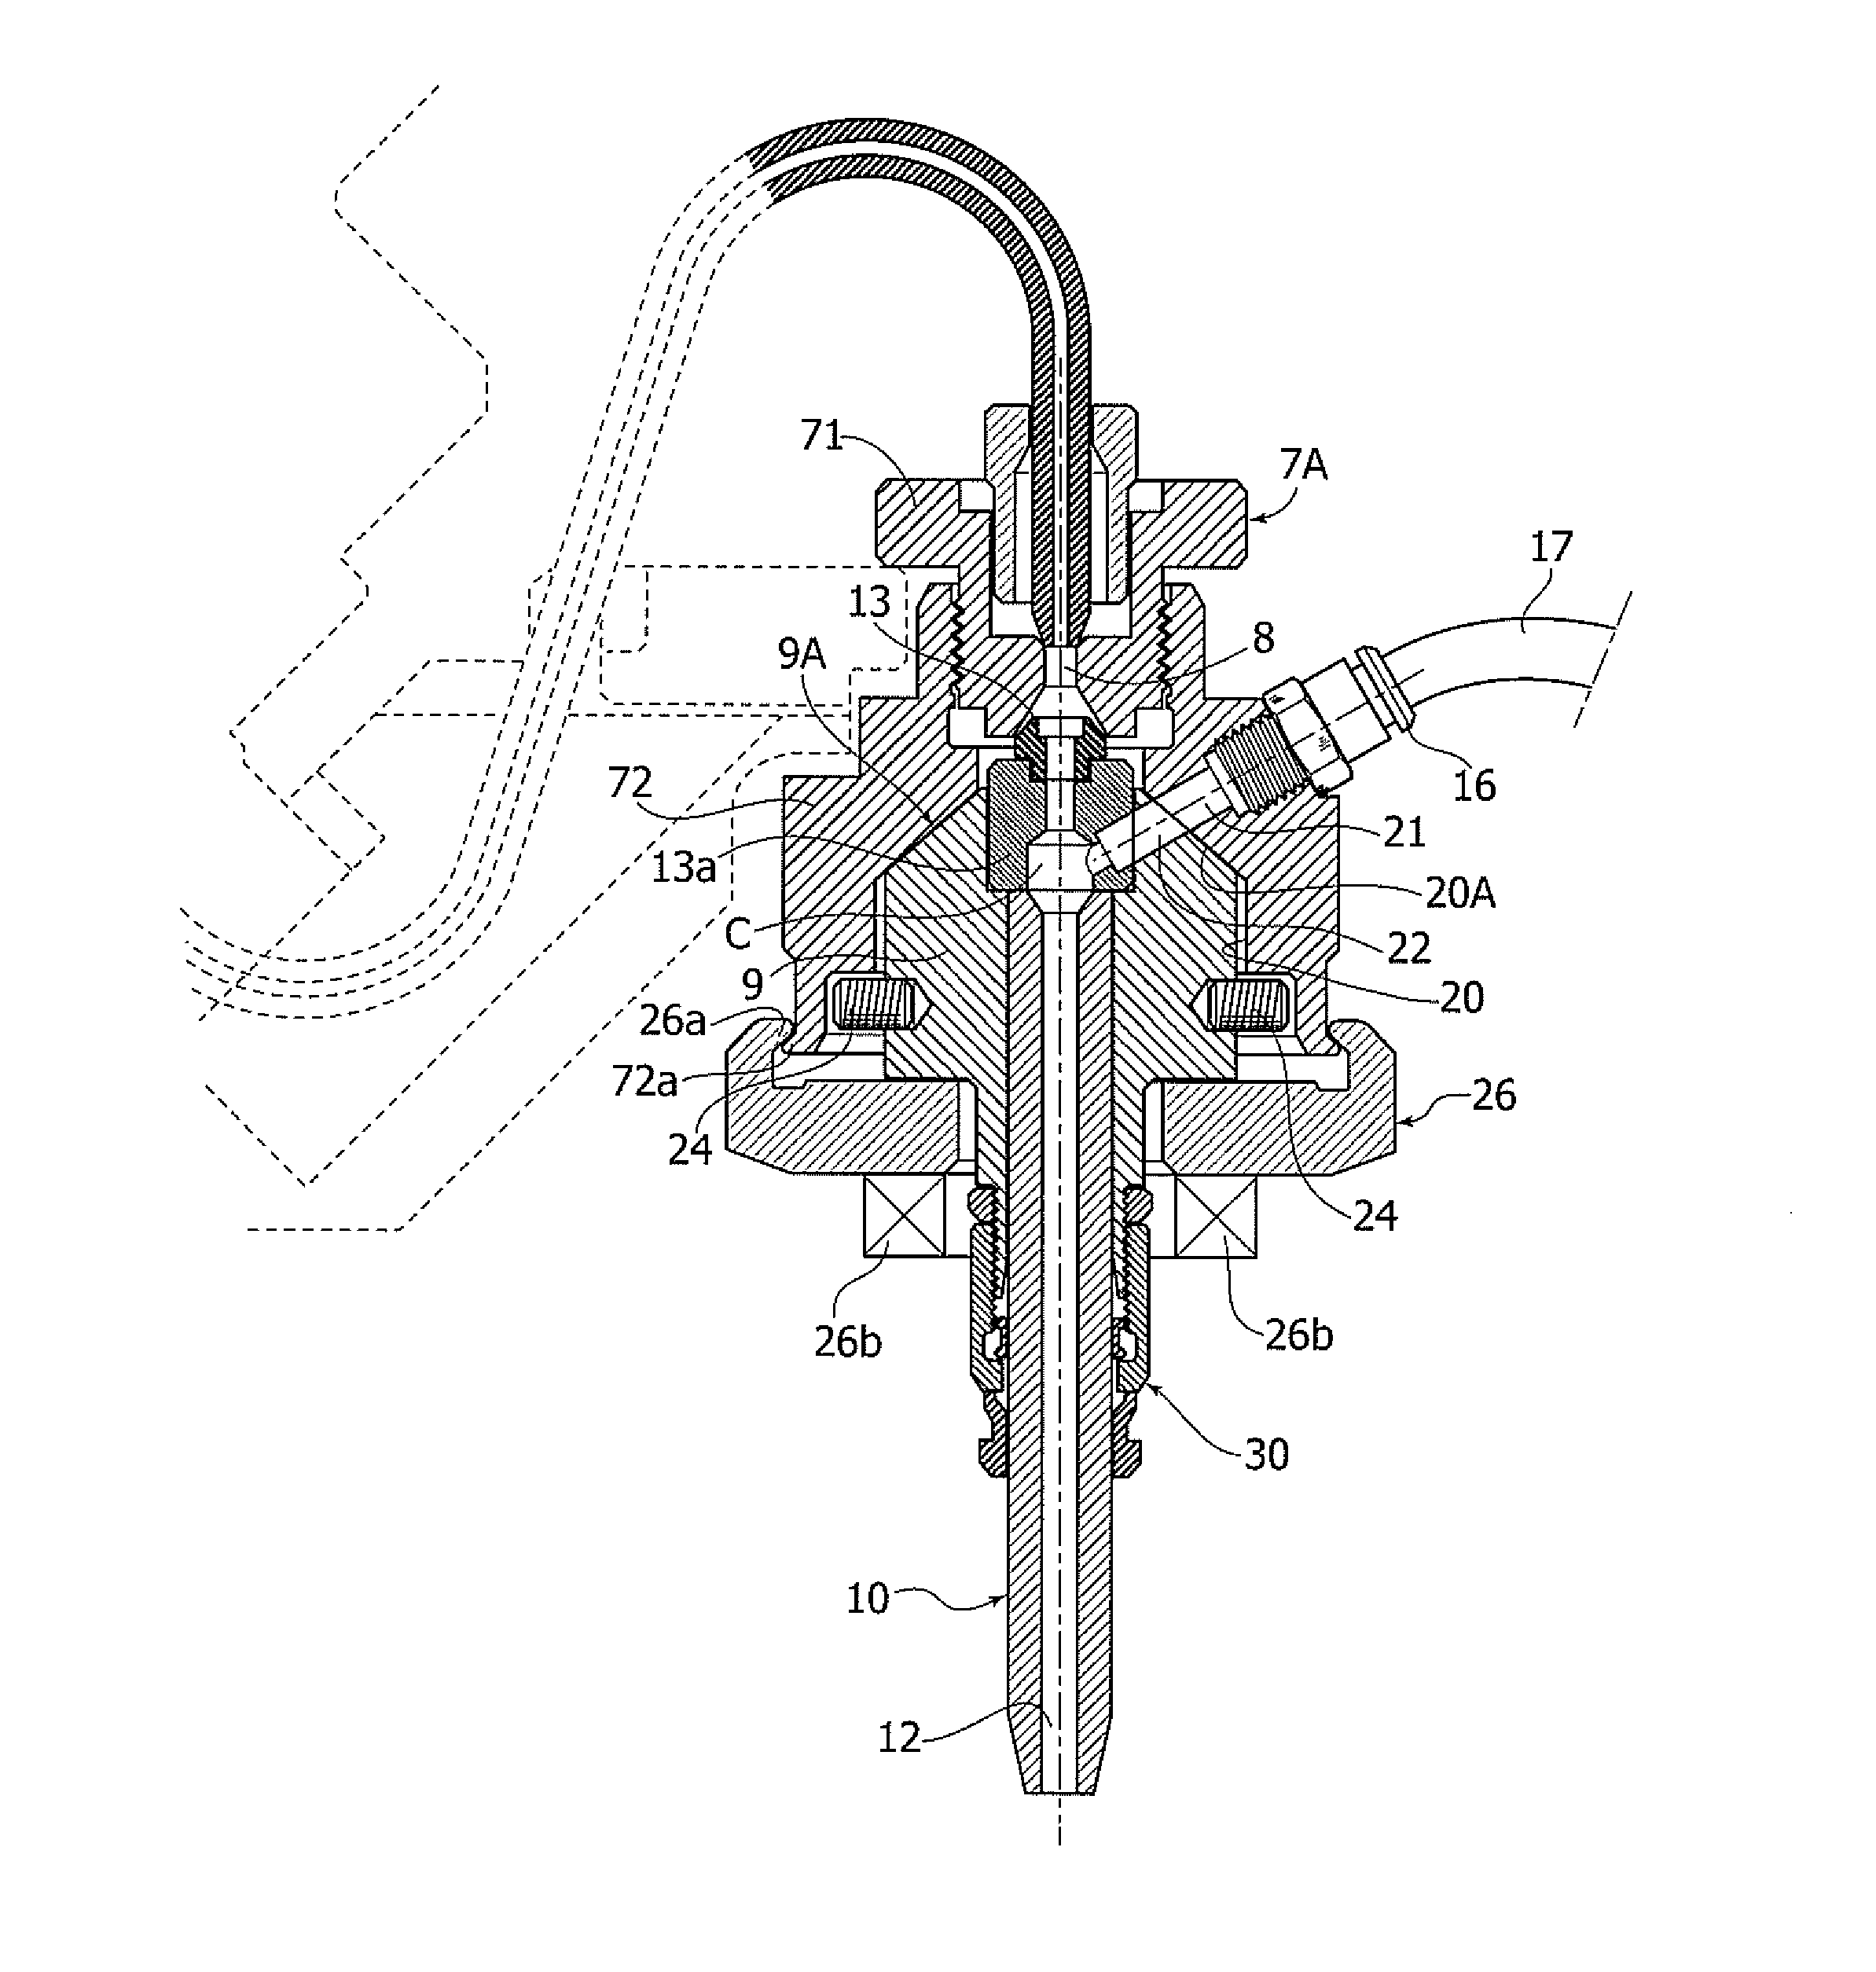 Water-jet operating head for cutting materials with a hydro-abrasive high pressure jet